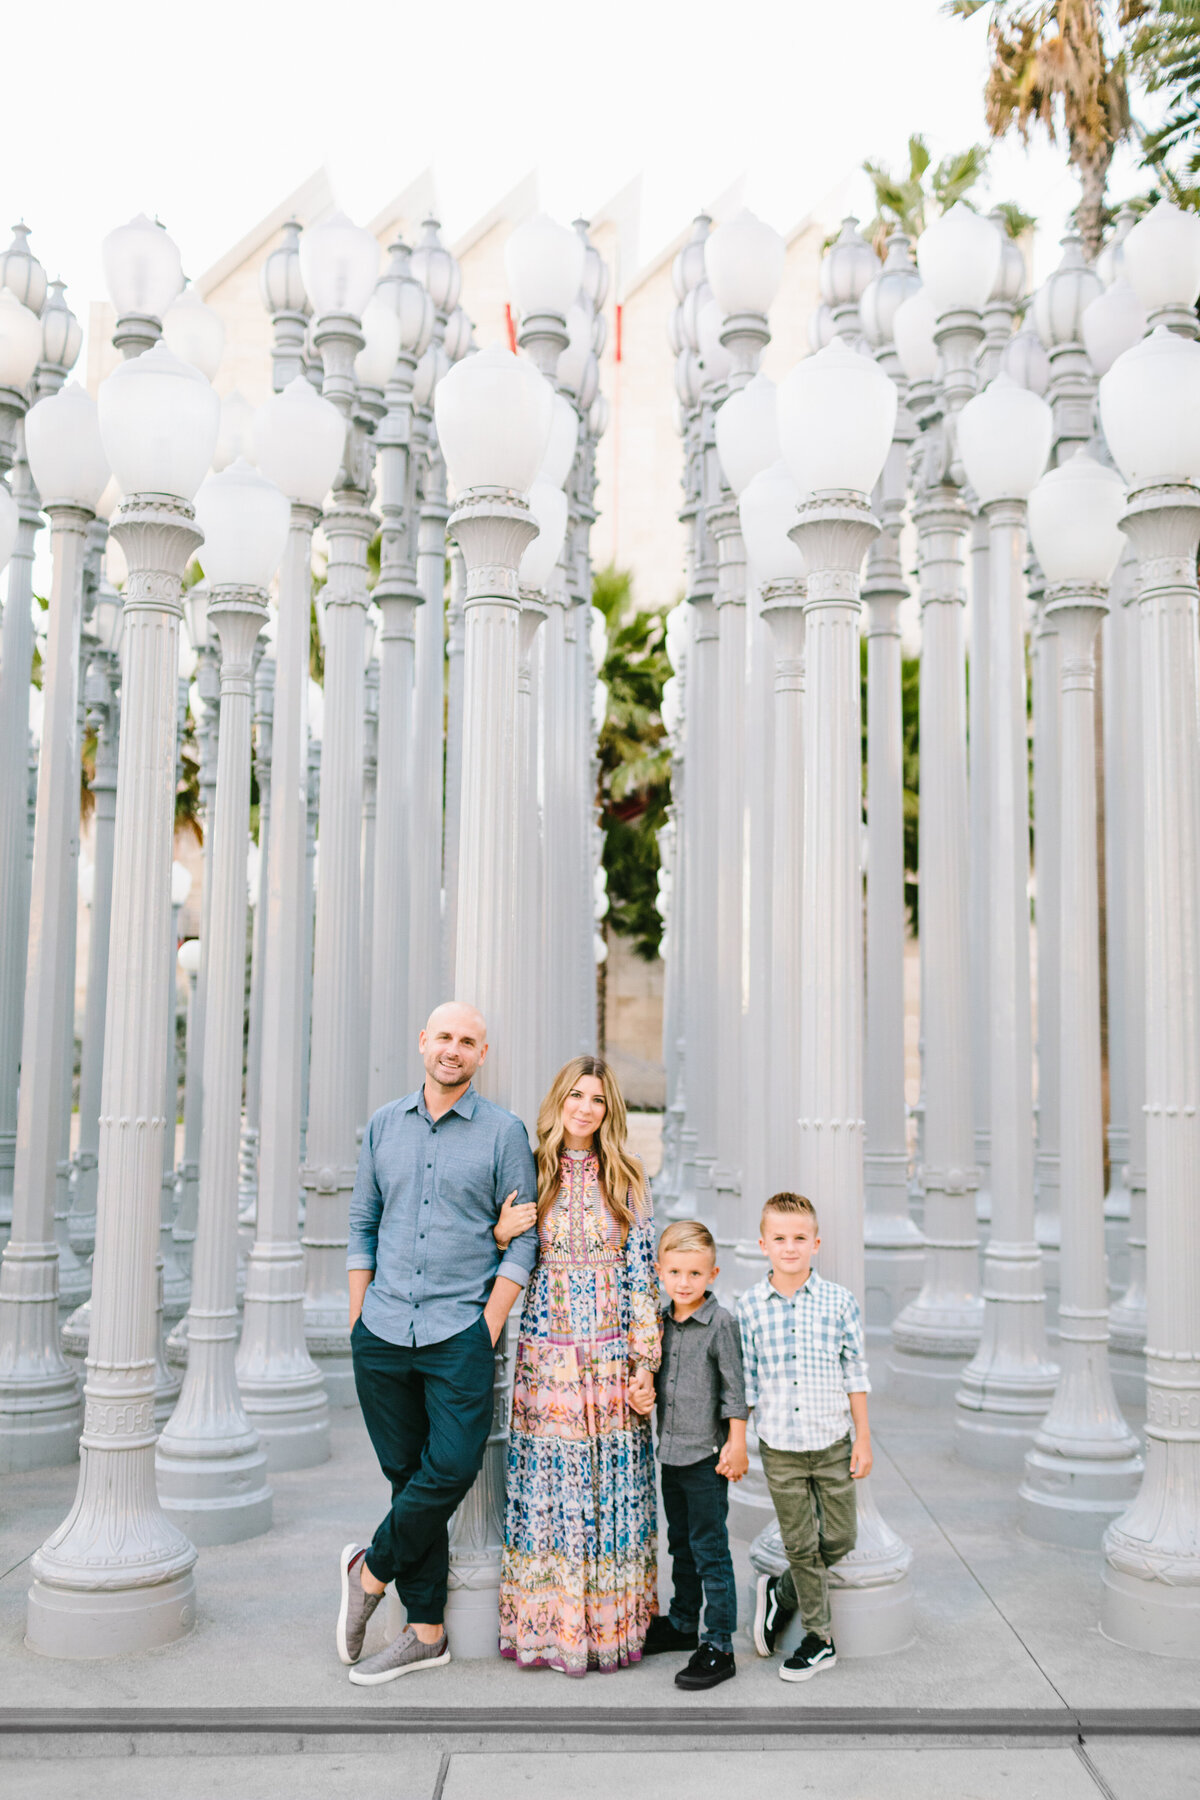 Best California and Texas Family Photographer-Jodee Debes Photography-191